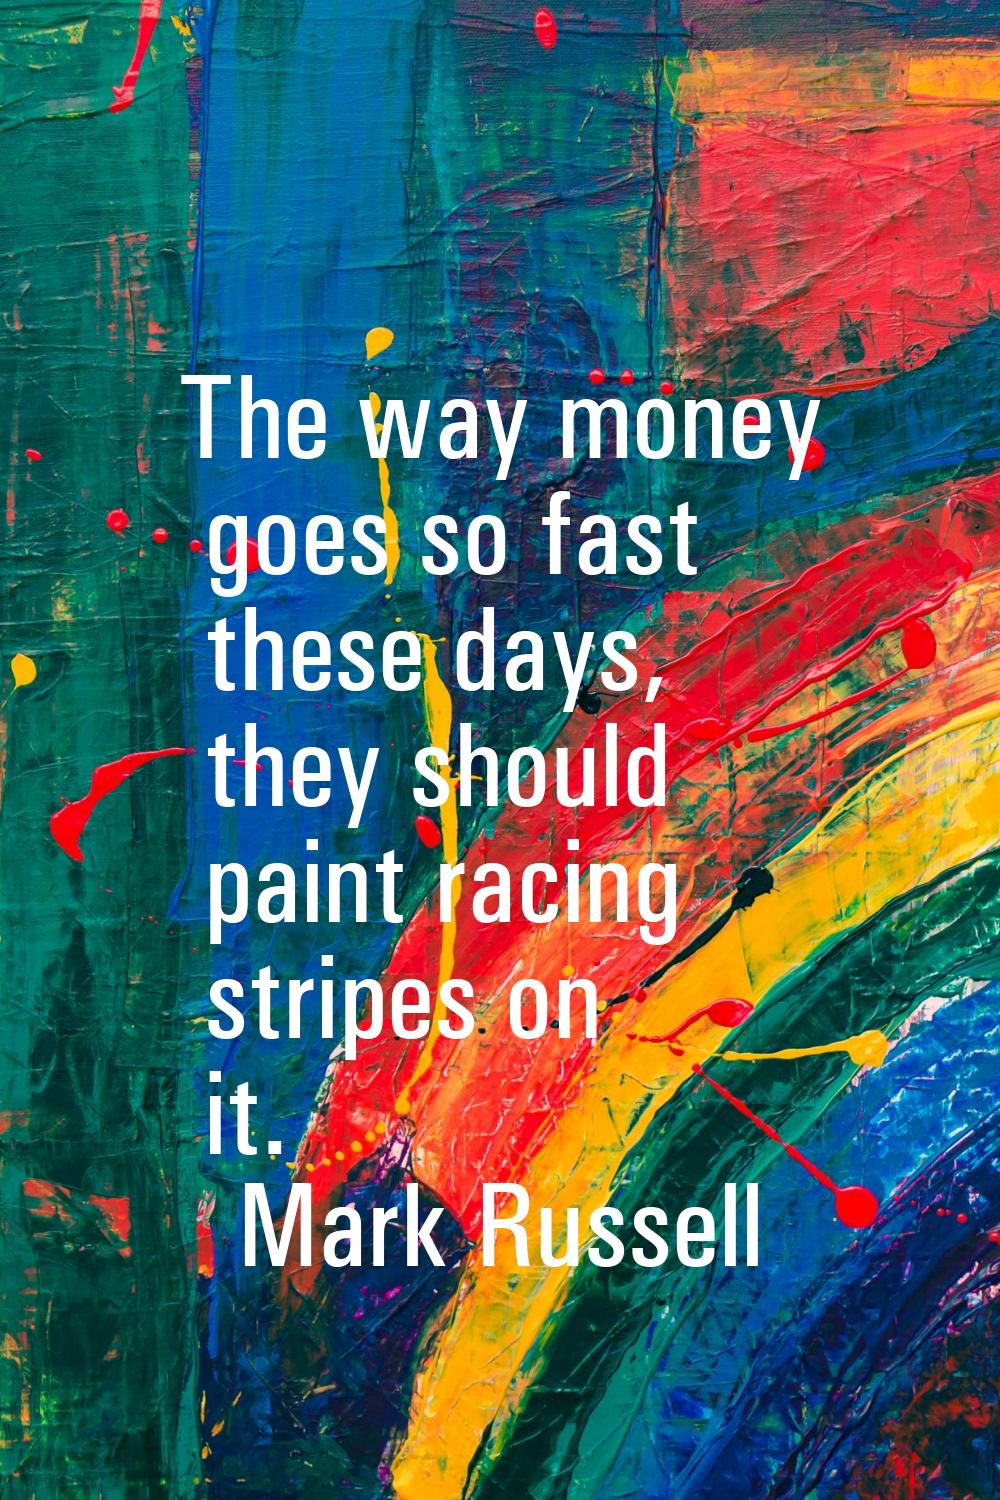 The way money goes so fast these days, they should paint racing stripes on it.